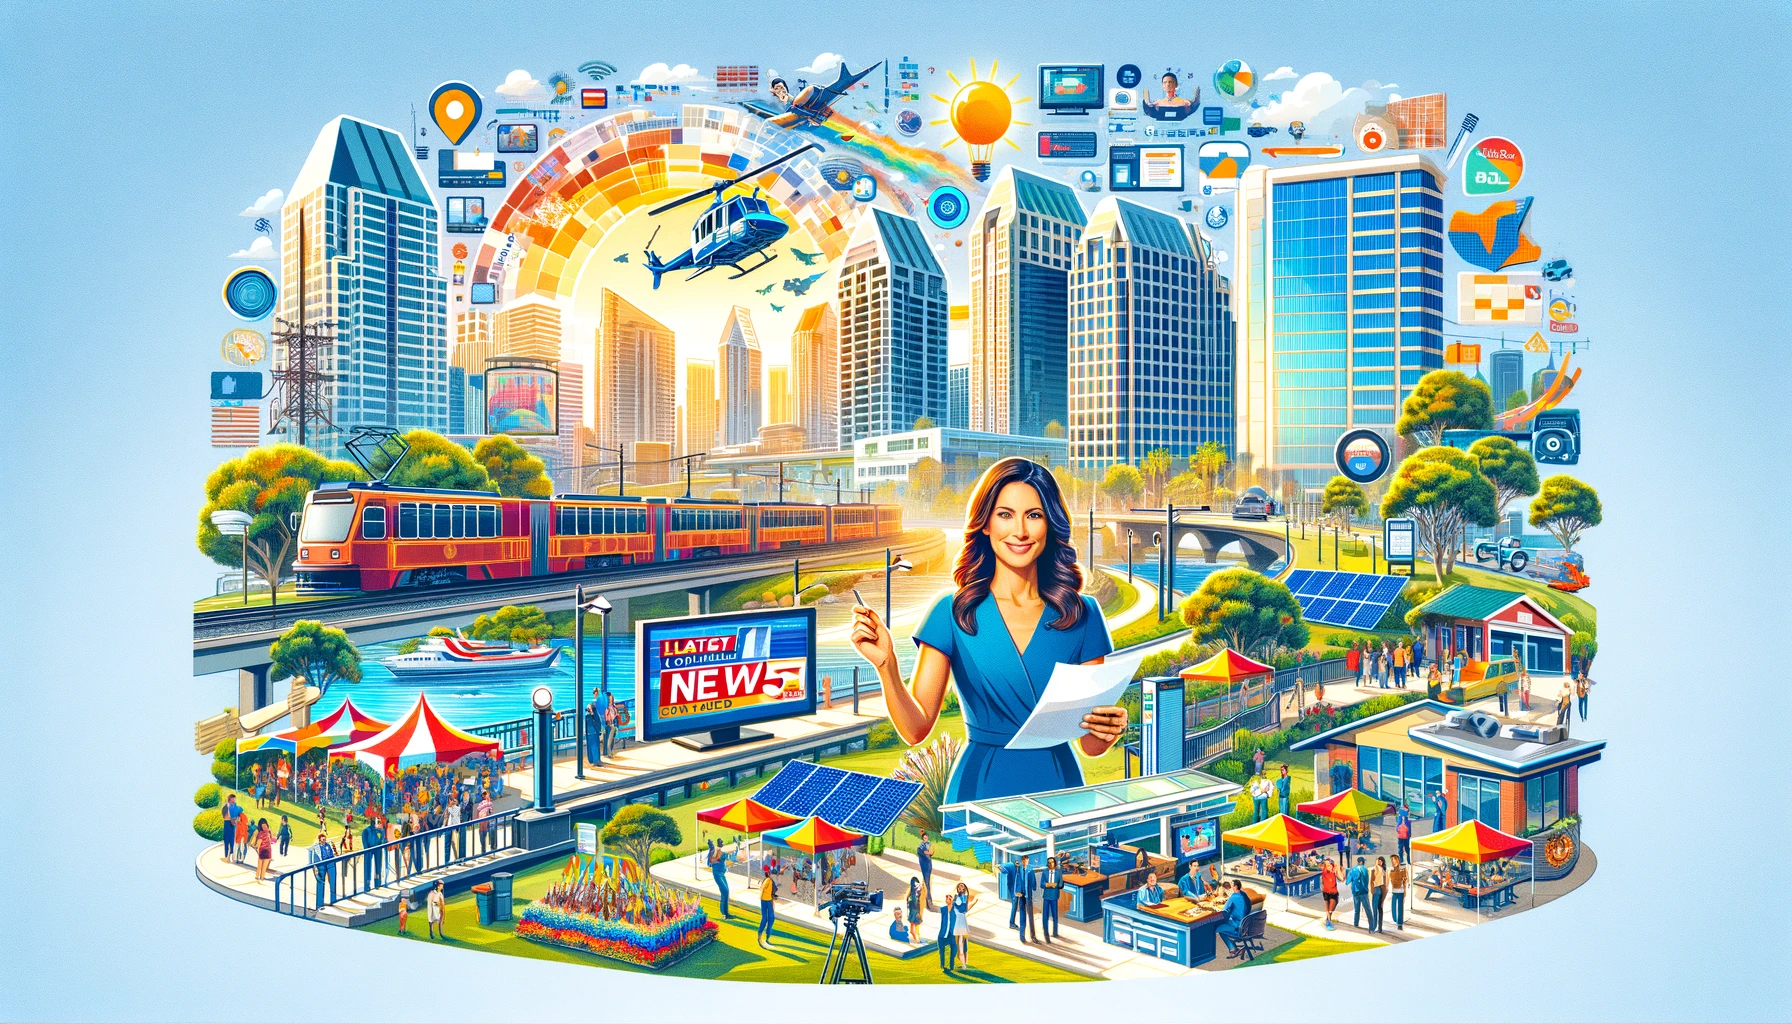 A vibrant collage depicting various aspects of the latest San Diego news, including the city skyline, a news anchor, a community festival, public transportation, a tech office, and a green park with solar panels.